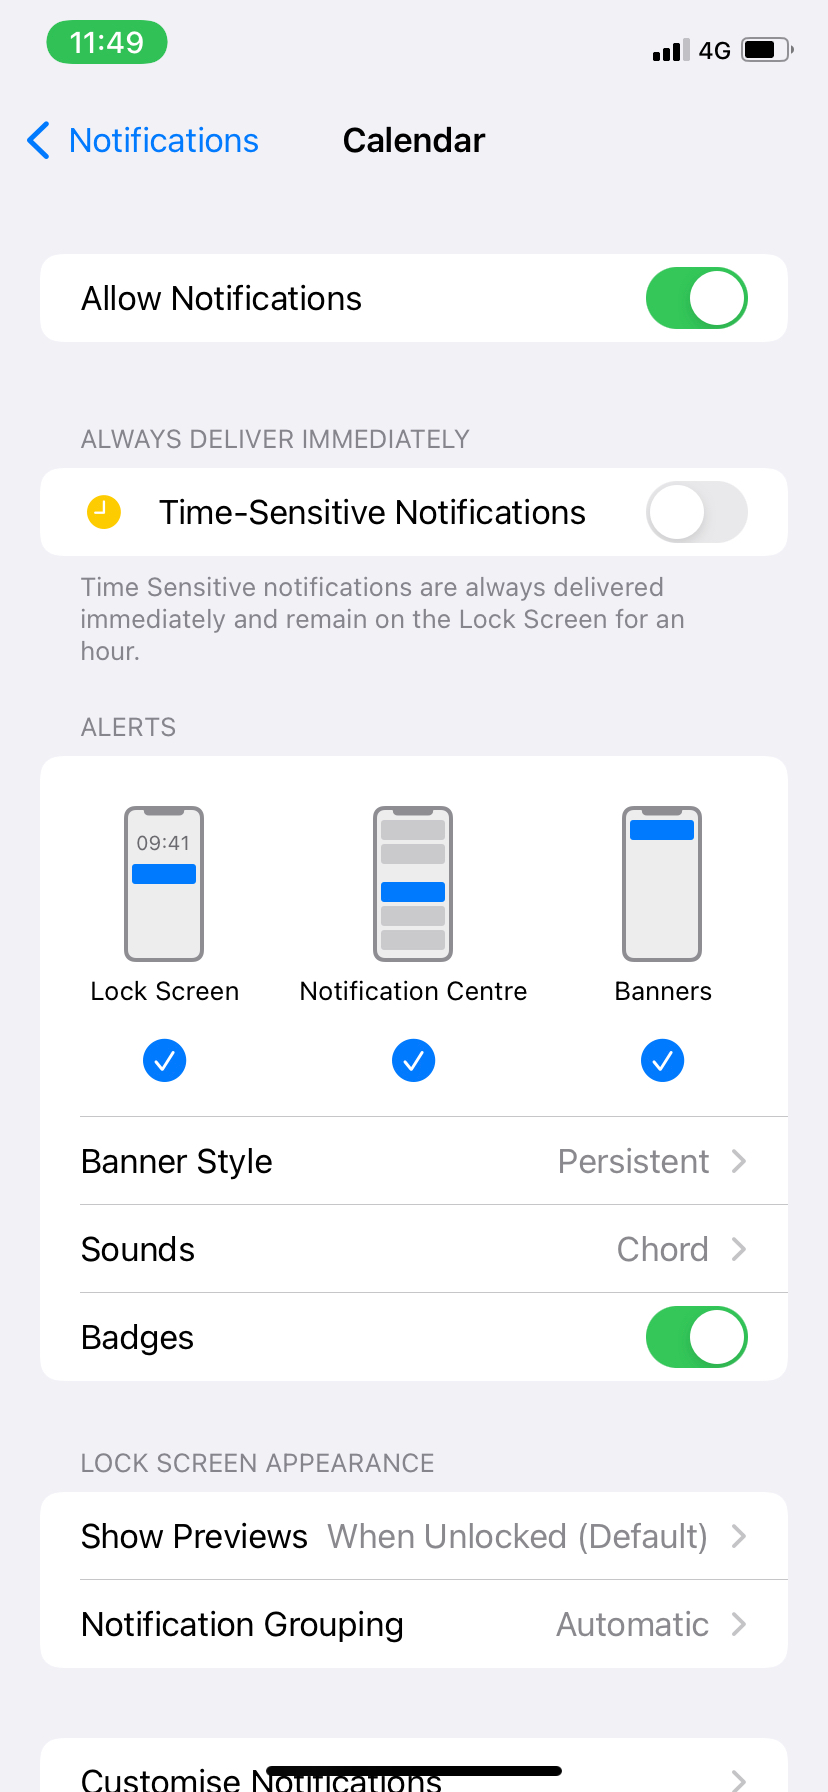 Disabled Time-sensitive notifications in Calendar app